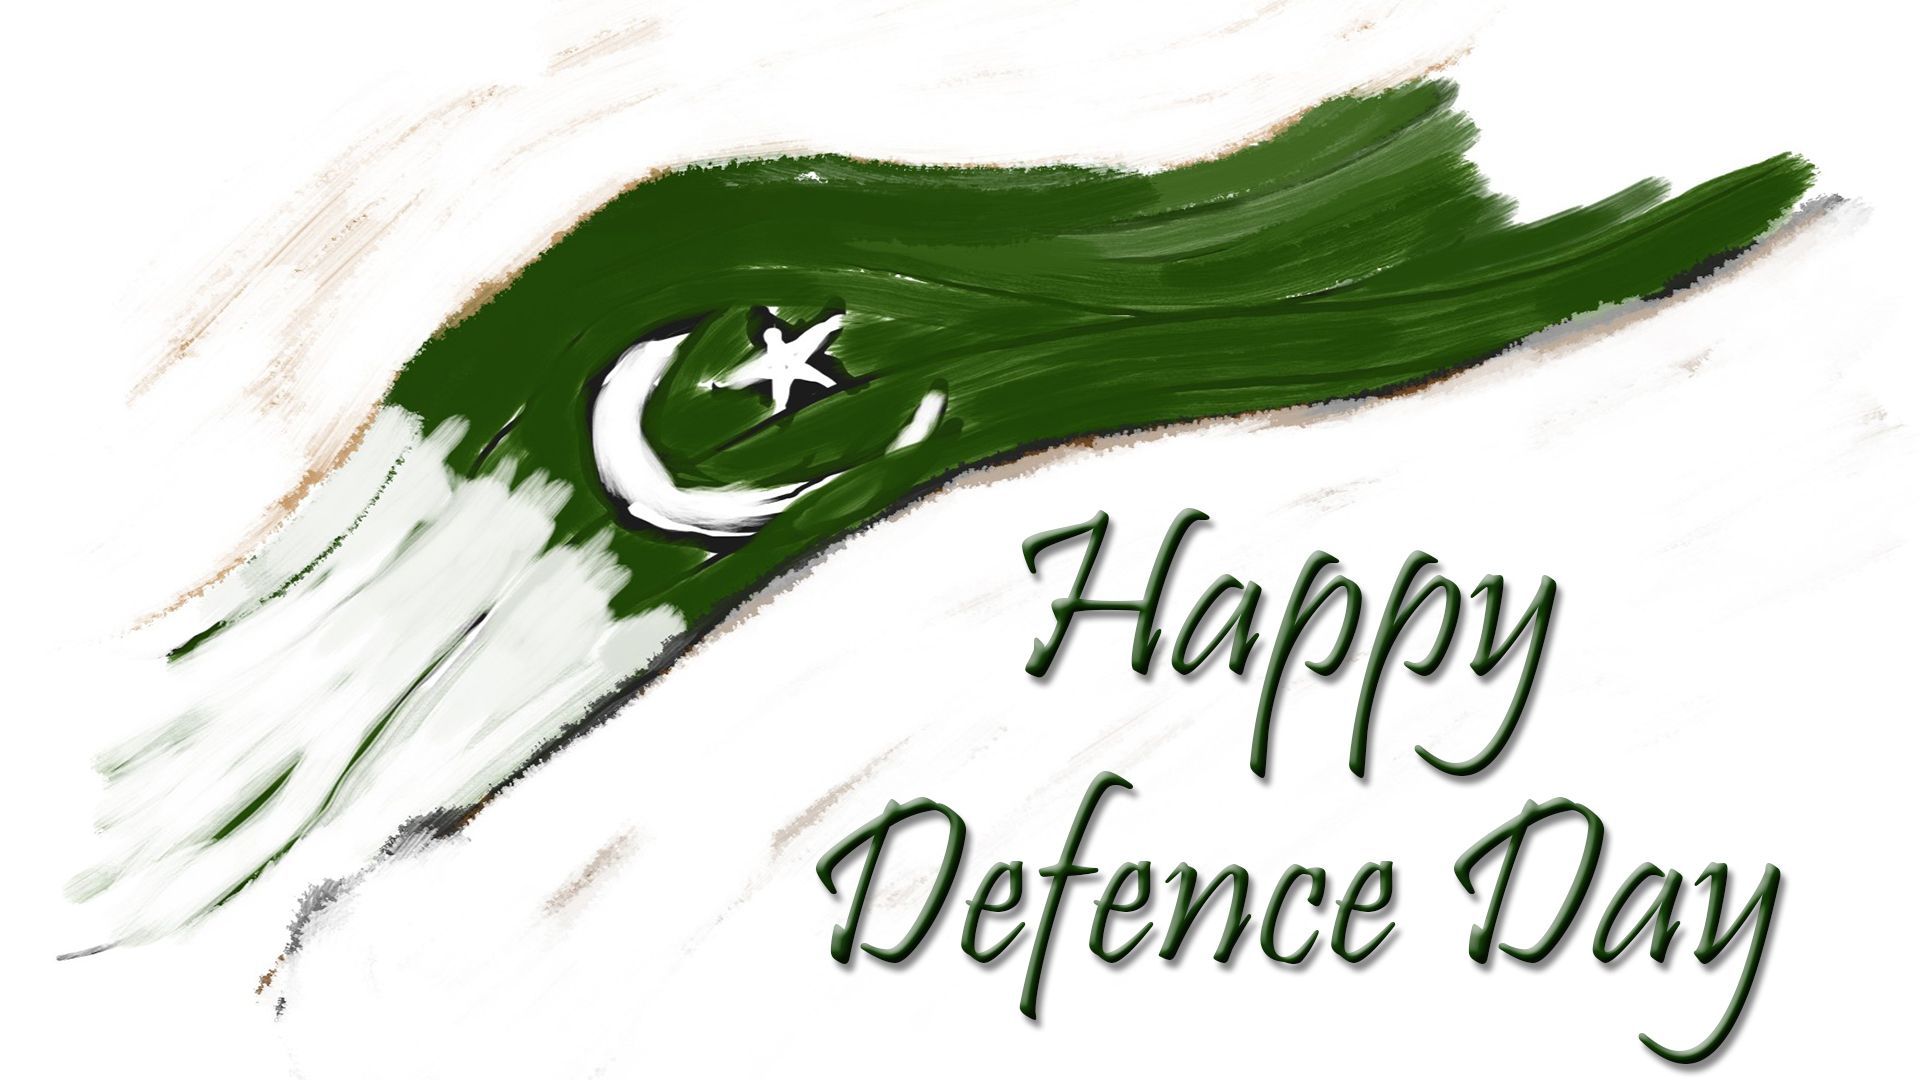 Happy Defence Day Pakistan Image & Wallpaper